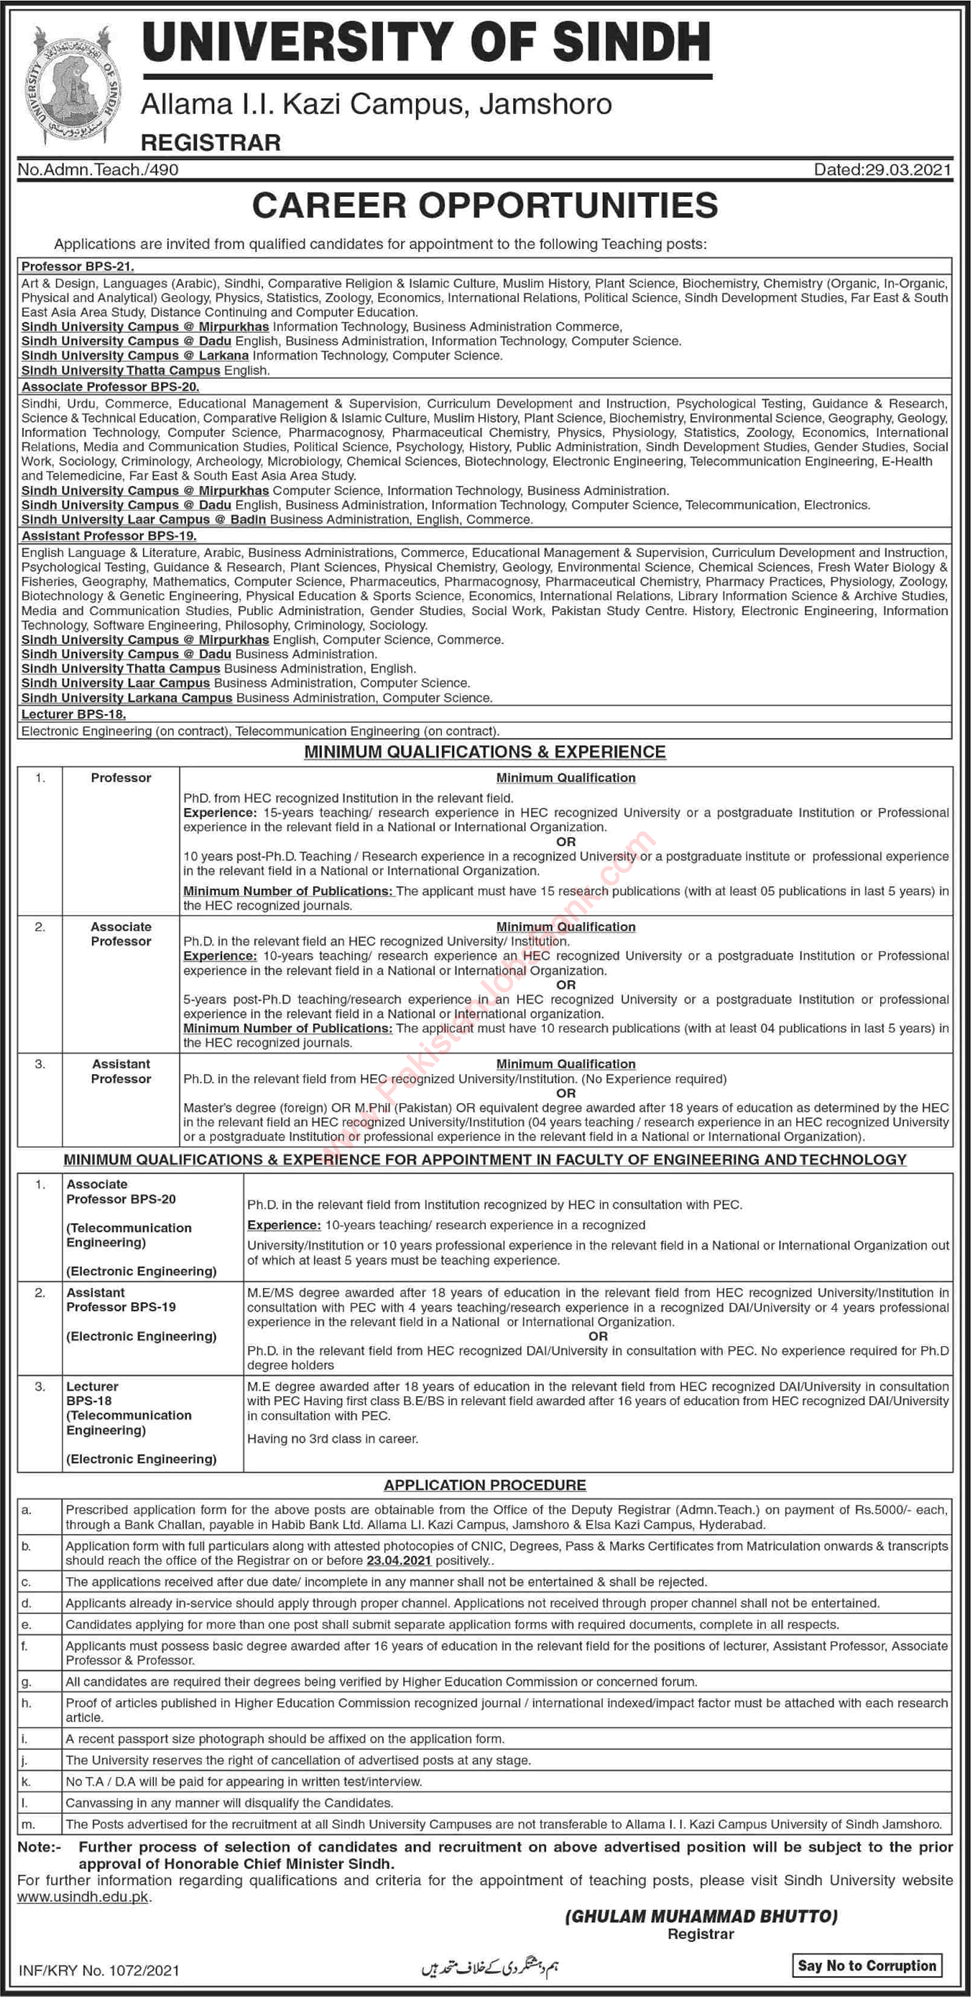 University of Sindh Jamshoro Jobs 2021 March / April Teaching Faculty Latest